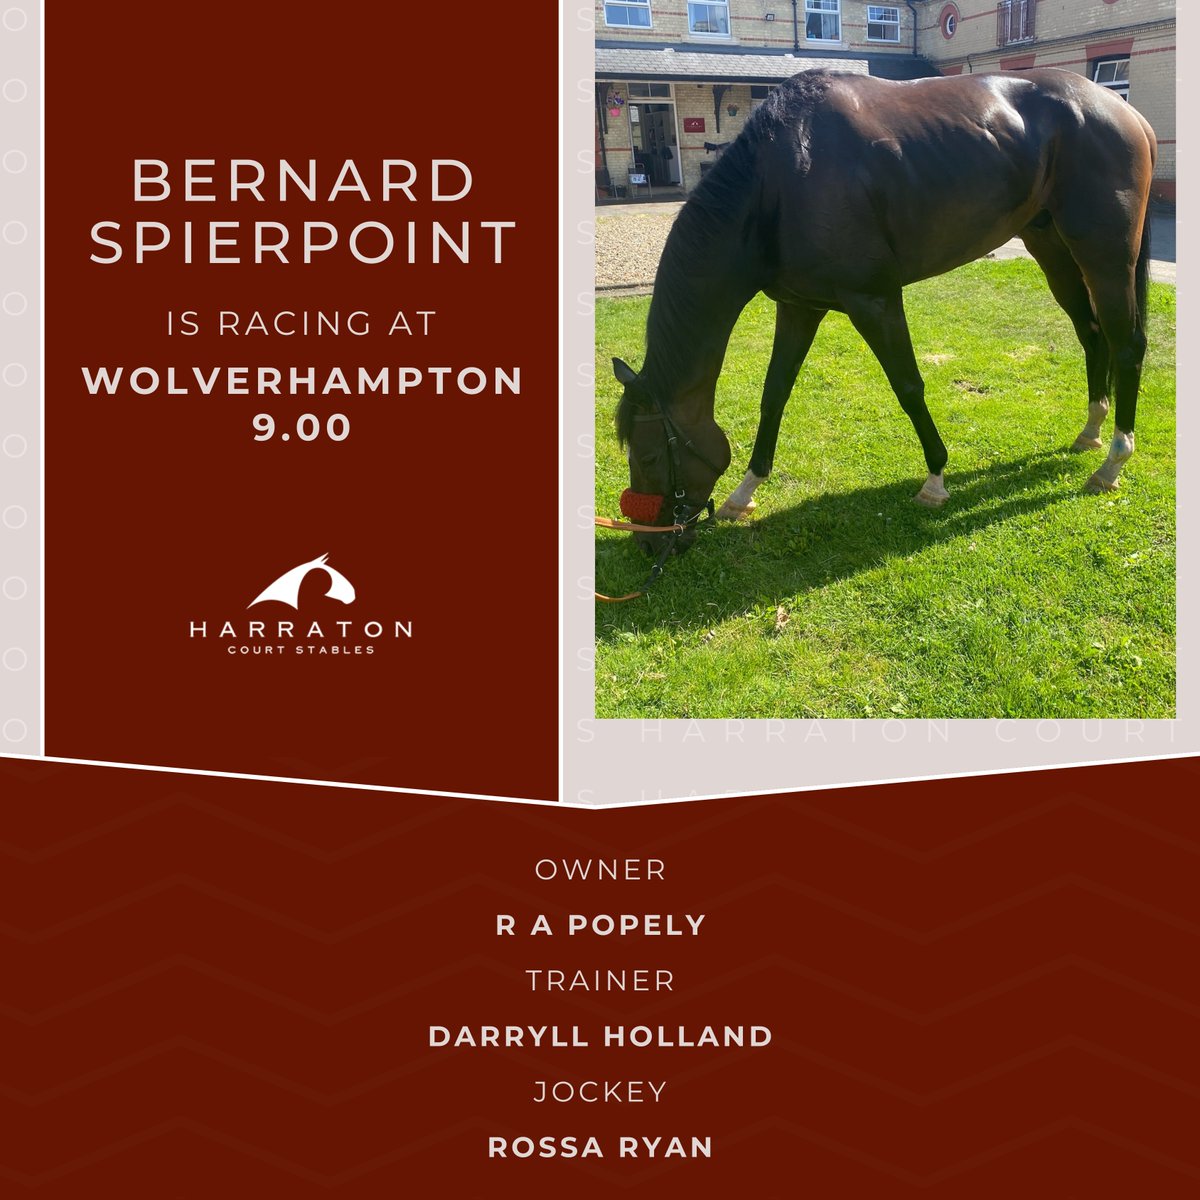 🏇Bernard Spierpoint is racing at Wolverhampton 9.00! Good luck to owner R A Popely, trainer #DarryllHolland and jockey @Rossaryan15 🍀